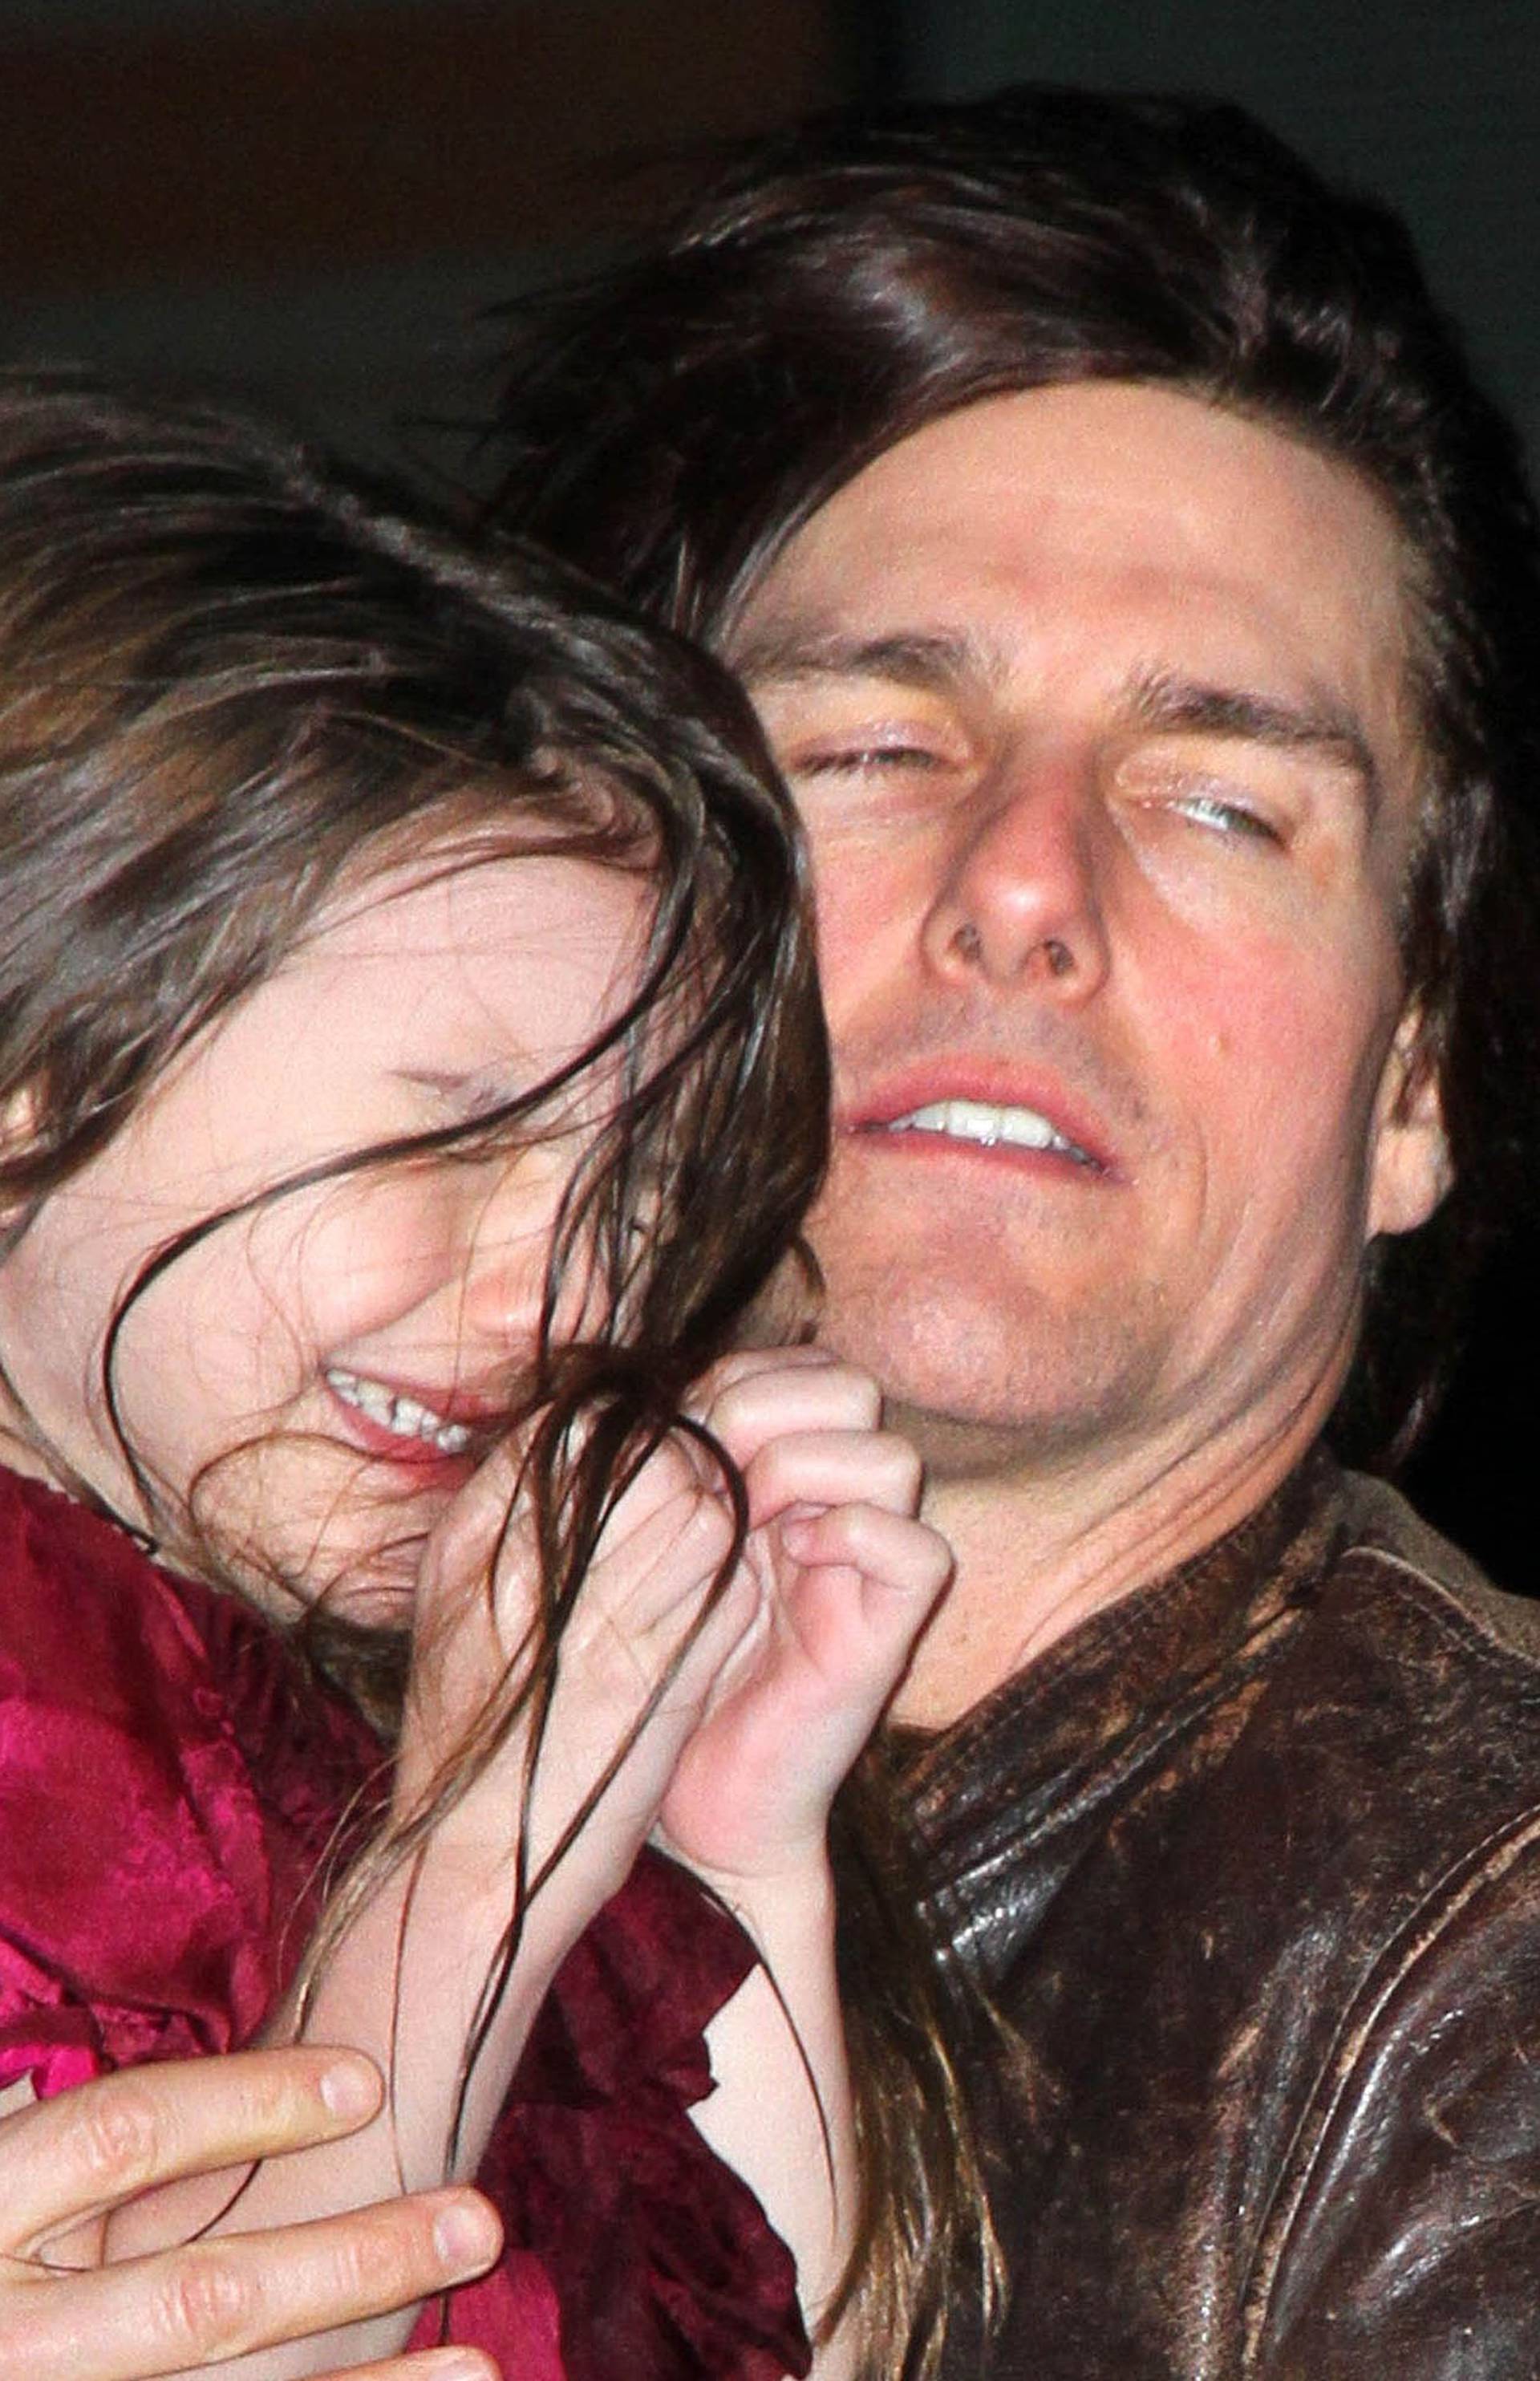 Tom Cruise and Katie Holmes sighting - New York